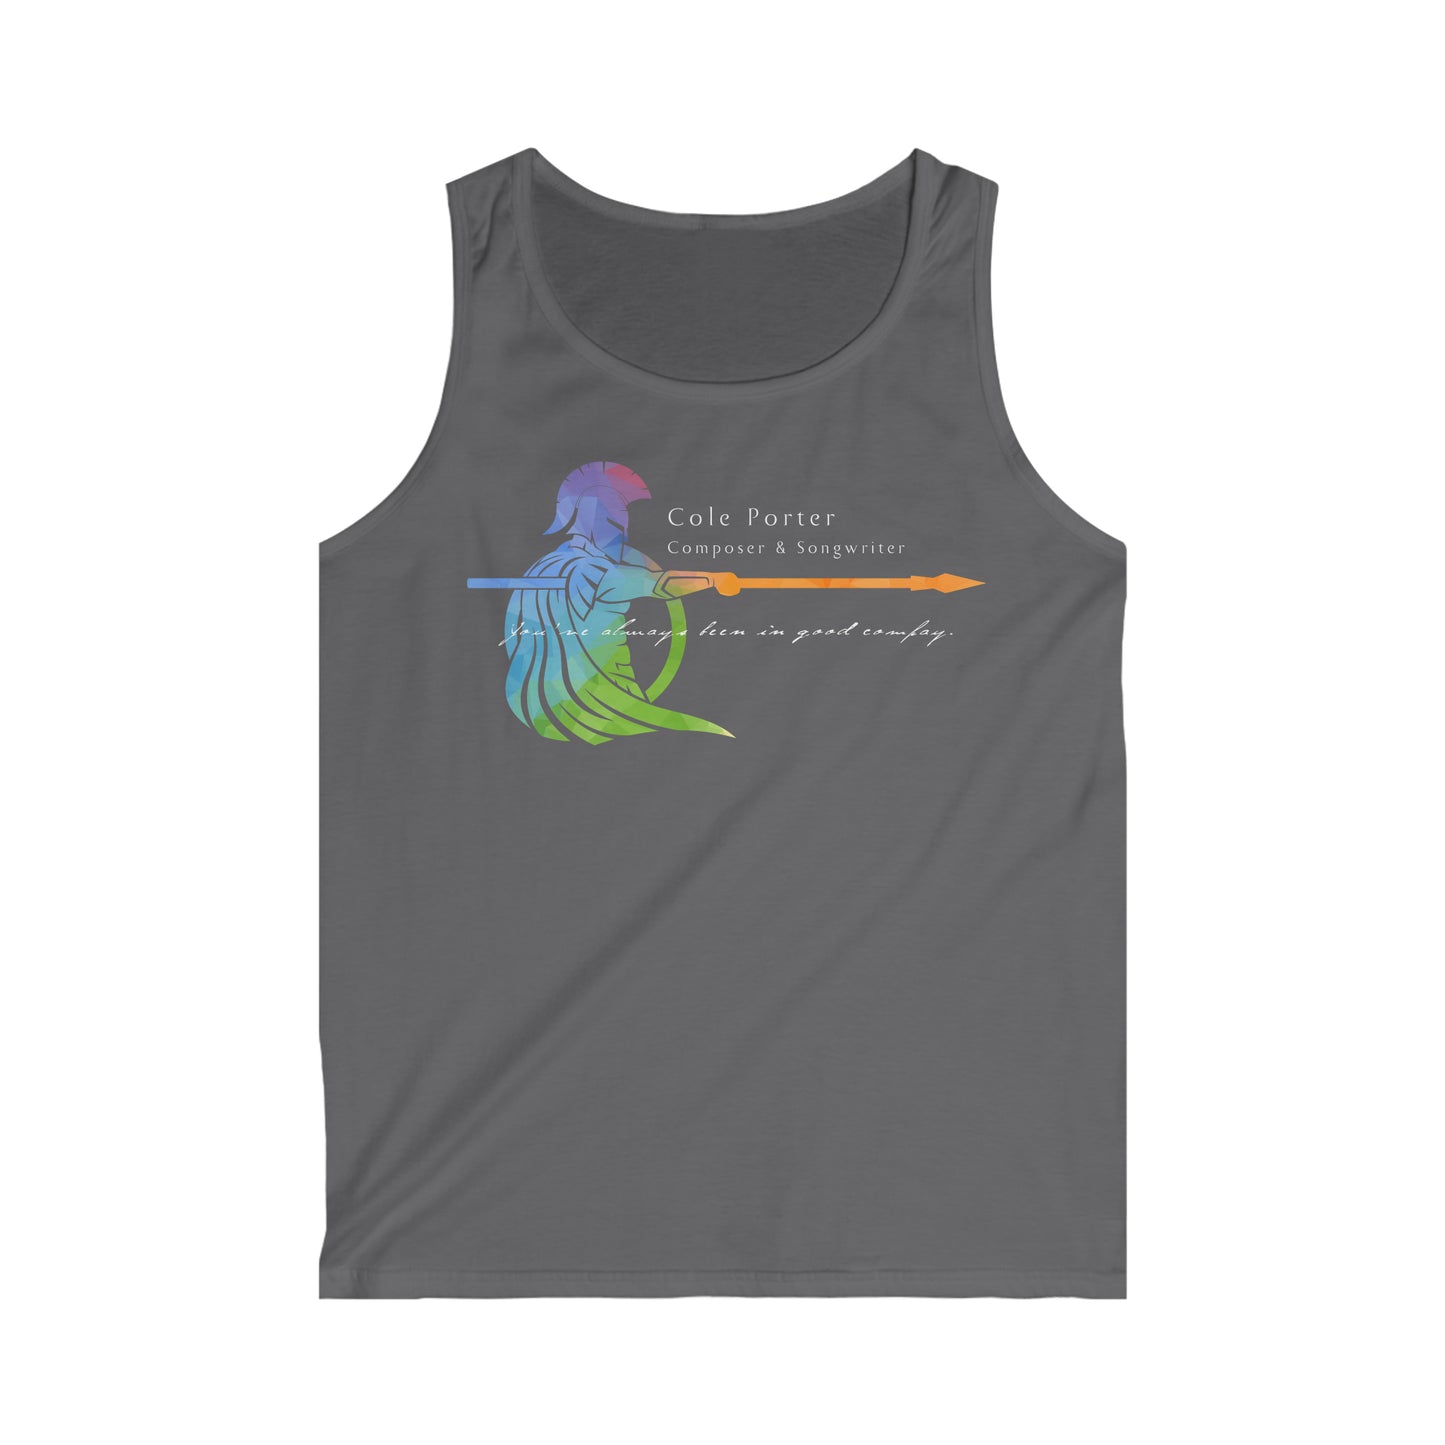 Cole Porter | Composer & Songwriter | Pride Jersey Tank